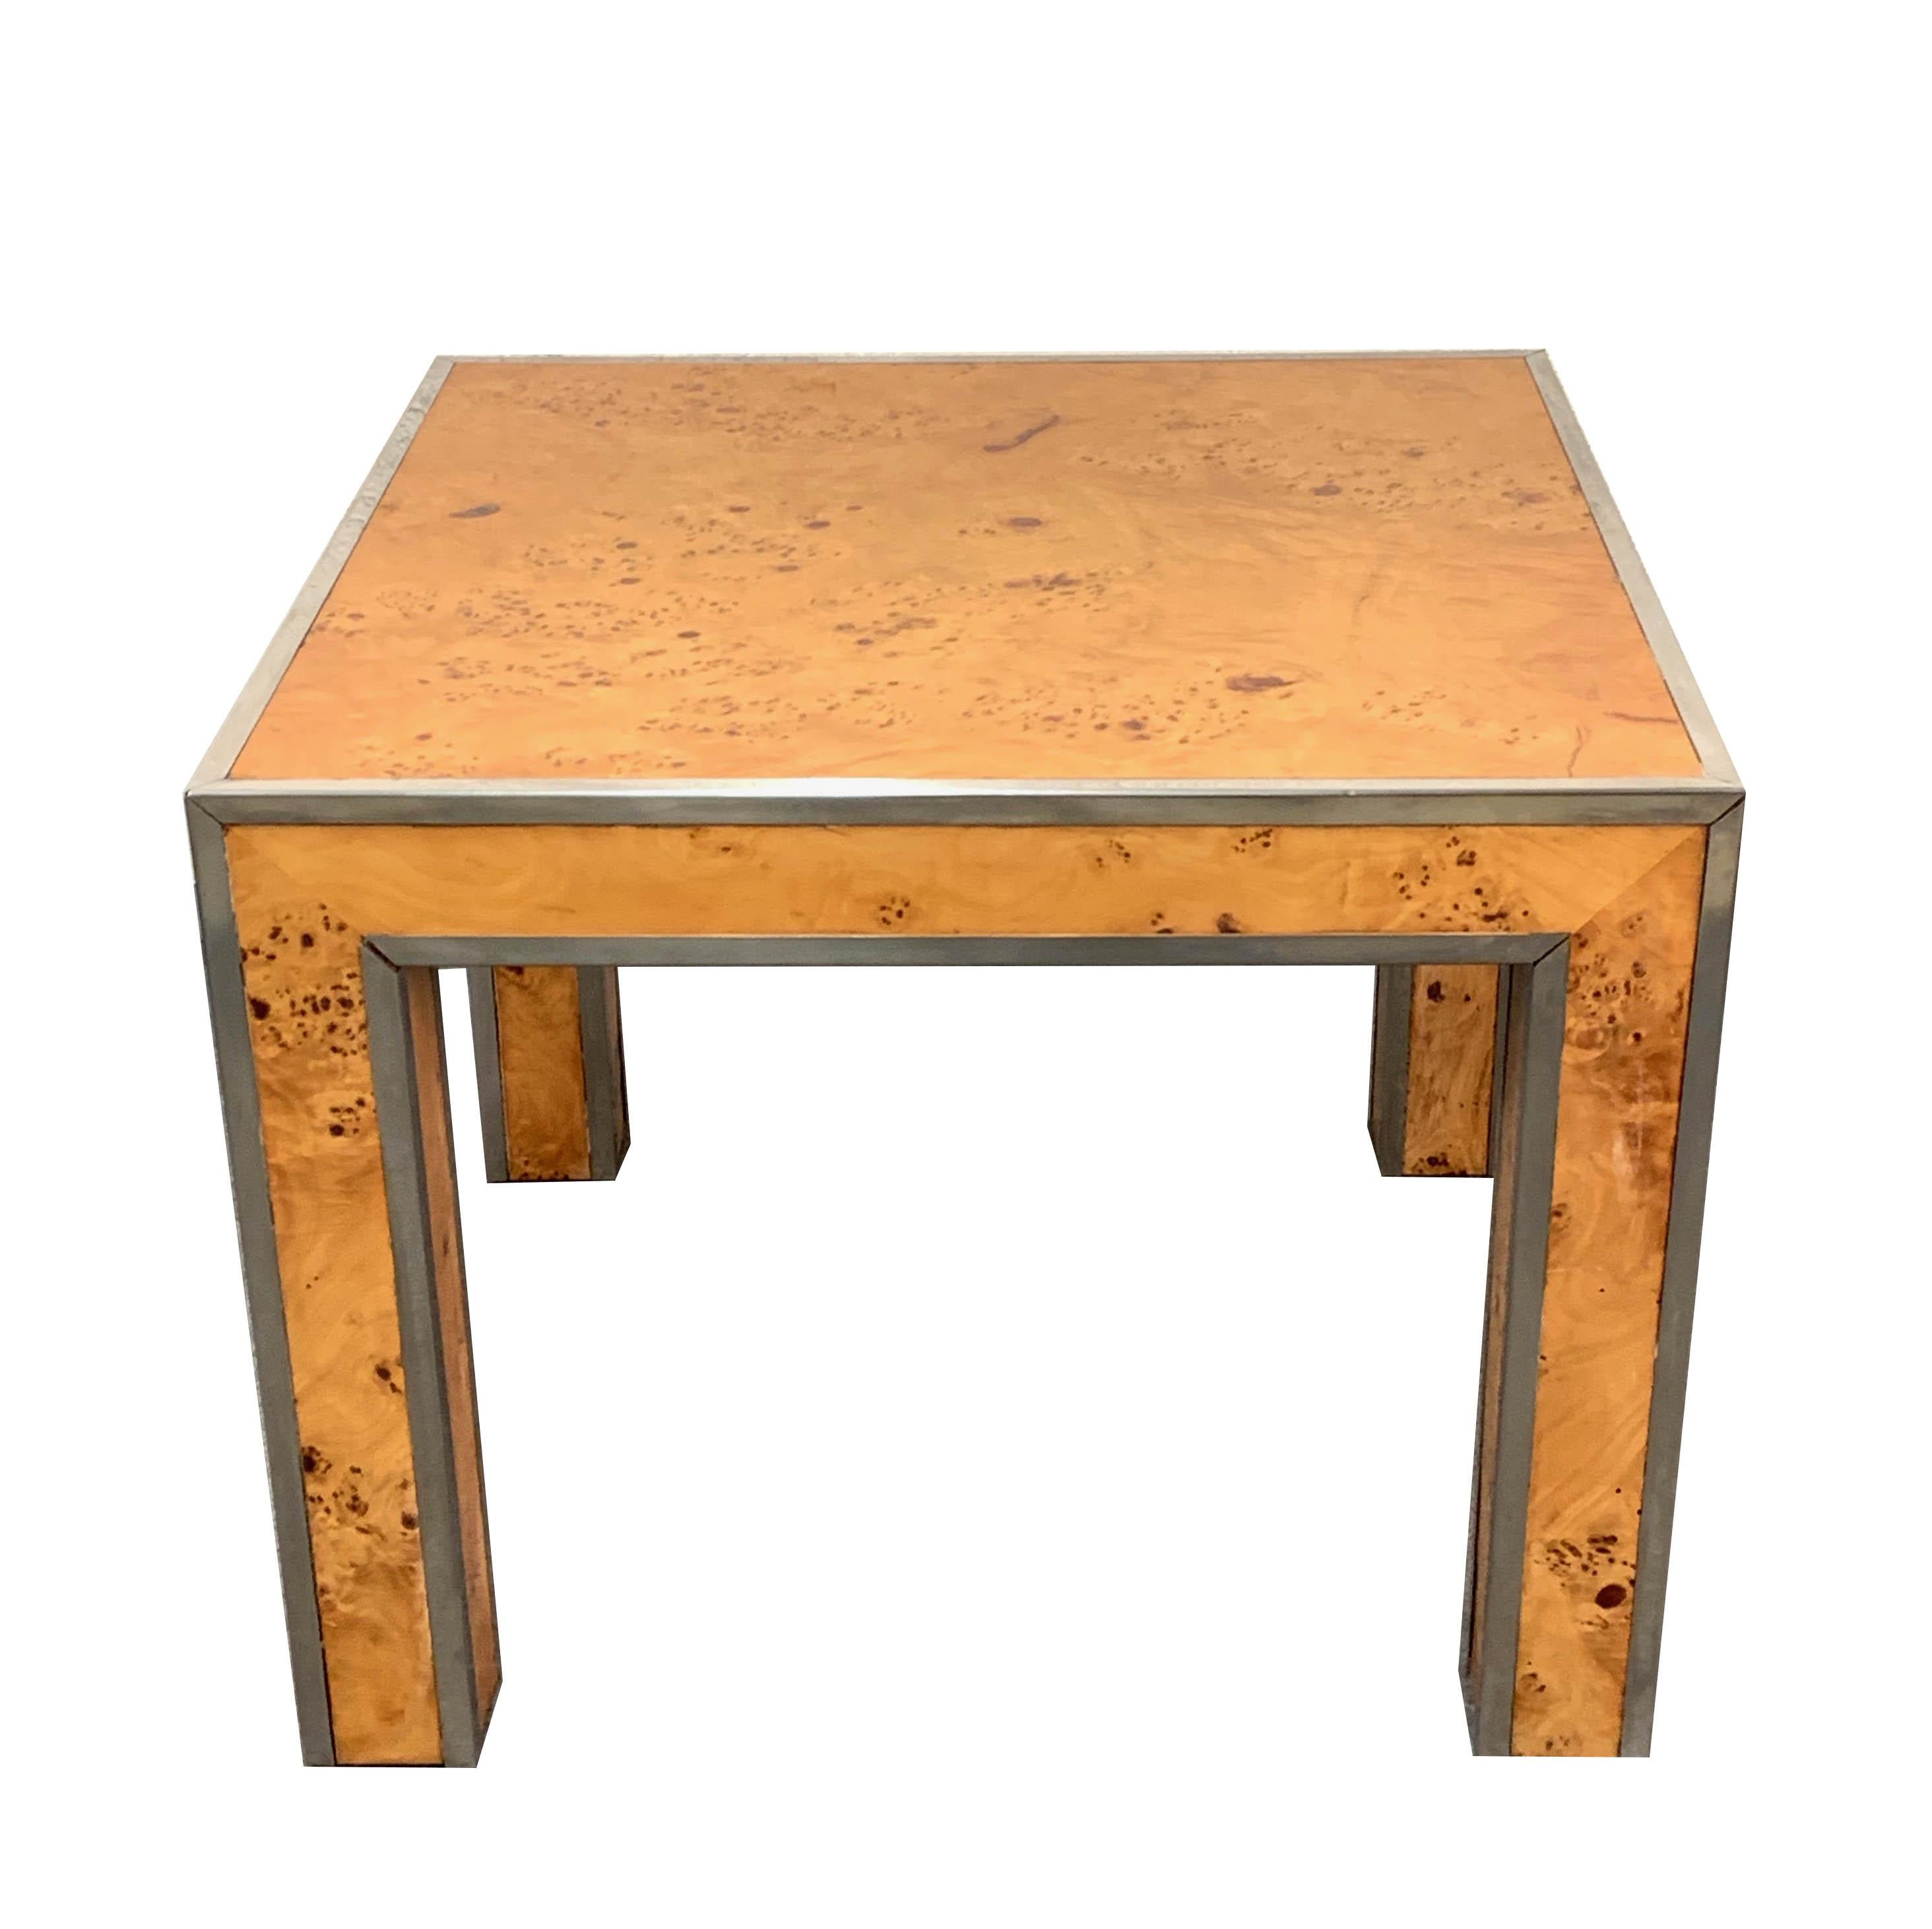 20th Century Square Briarwood and Metal Italian Coffee Table in Willy Rizzo Style, 1970s For Sale